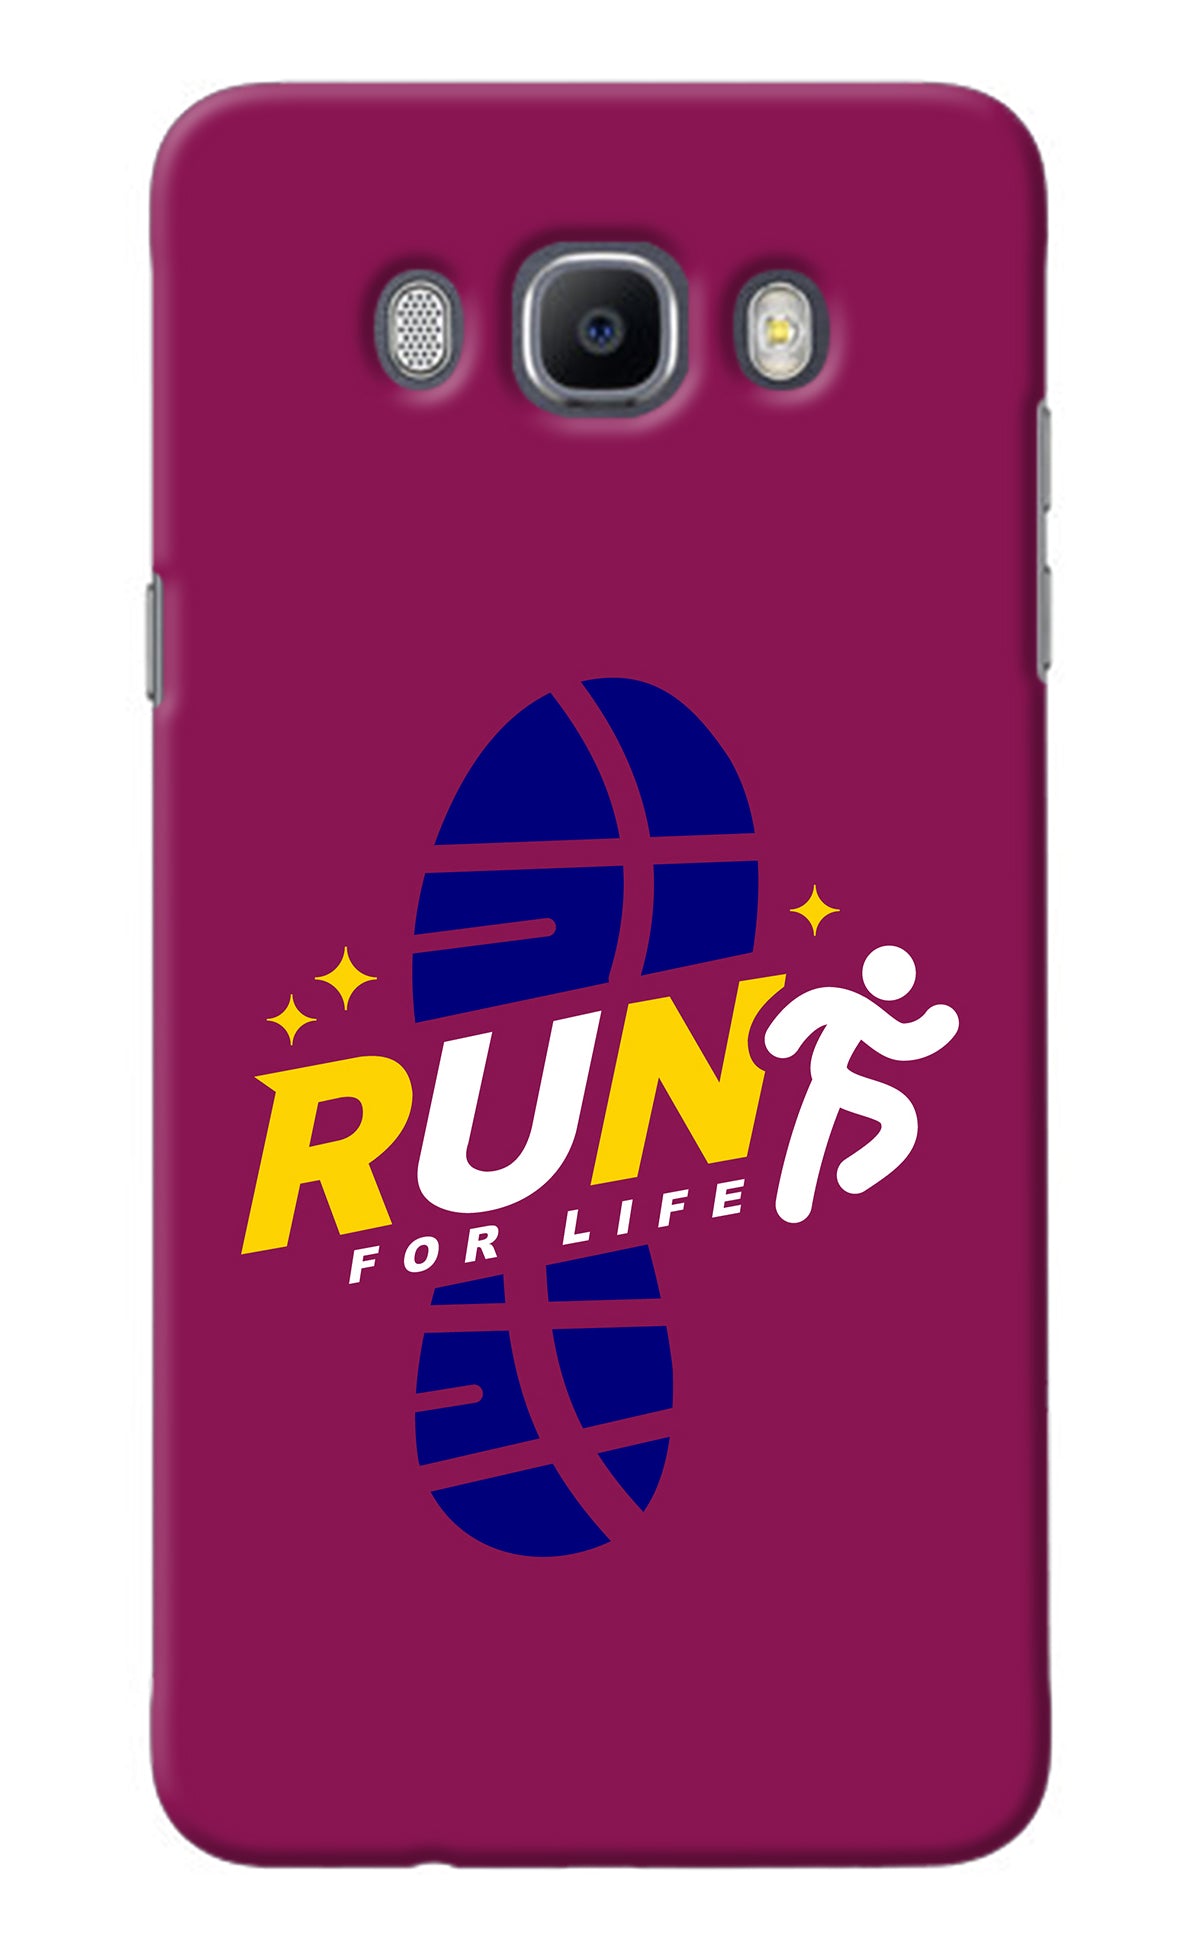 Run for Life Samsung J7 2016 Back Cover